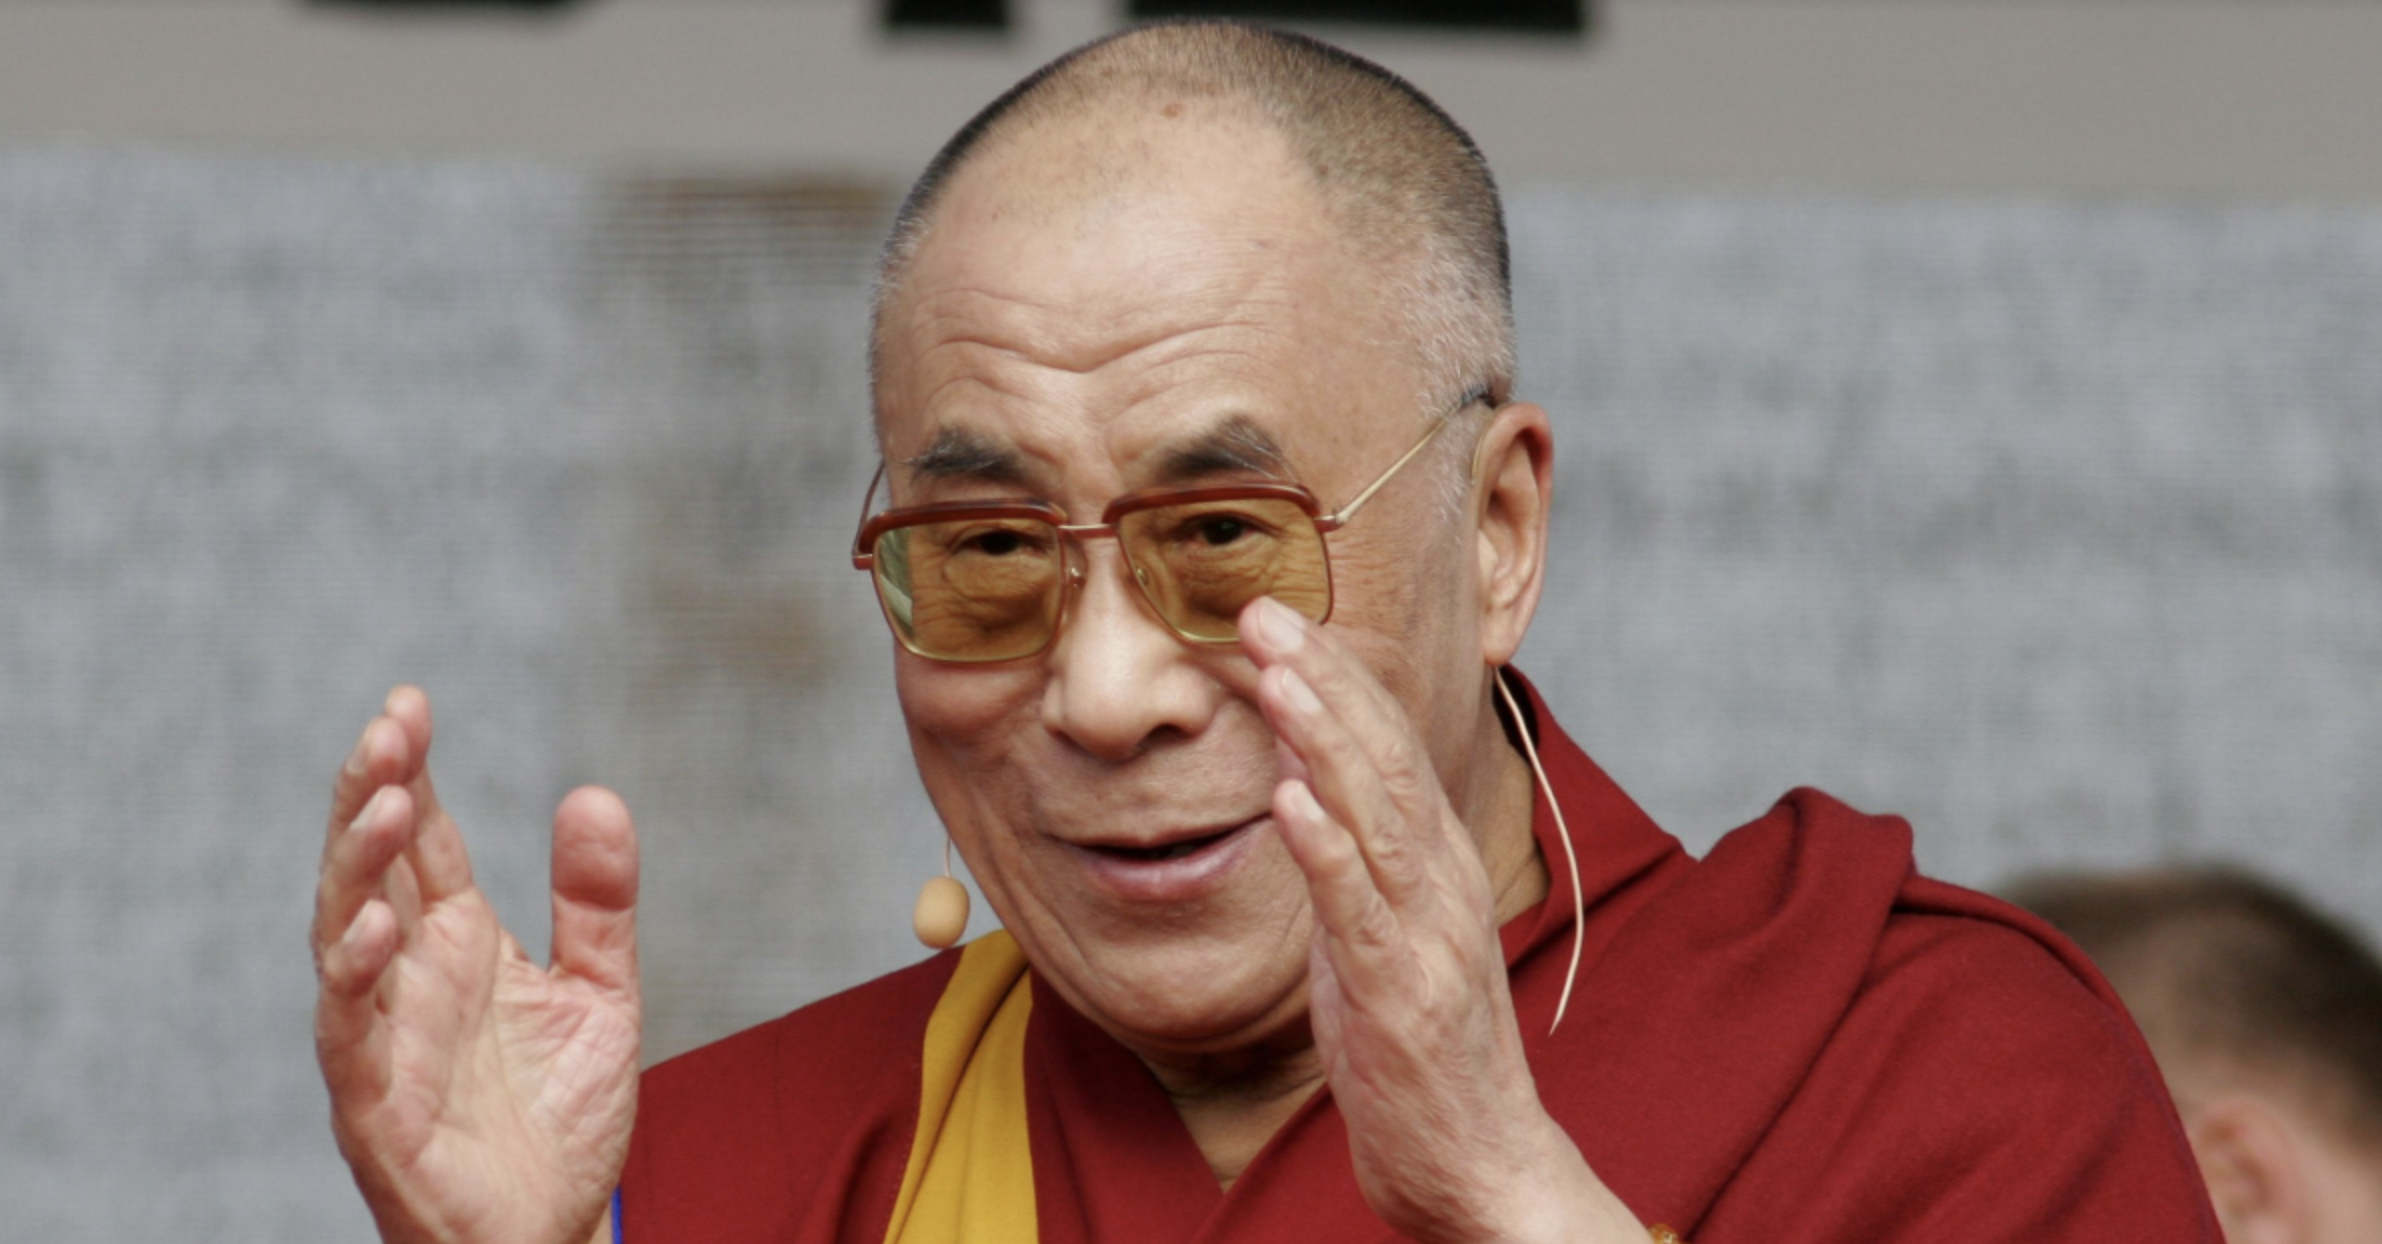 Does the Dalai Lamas Conduct Amount to a Child Sexual Offence?